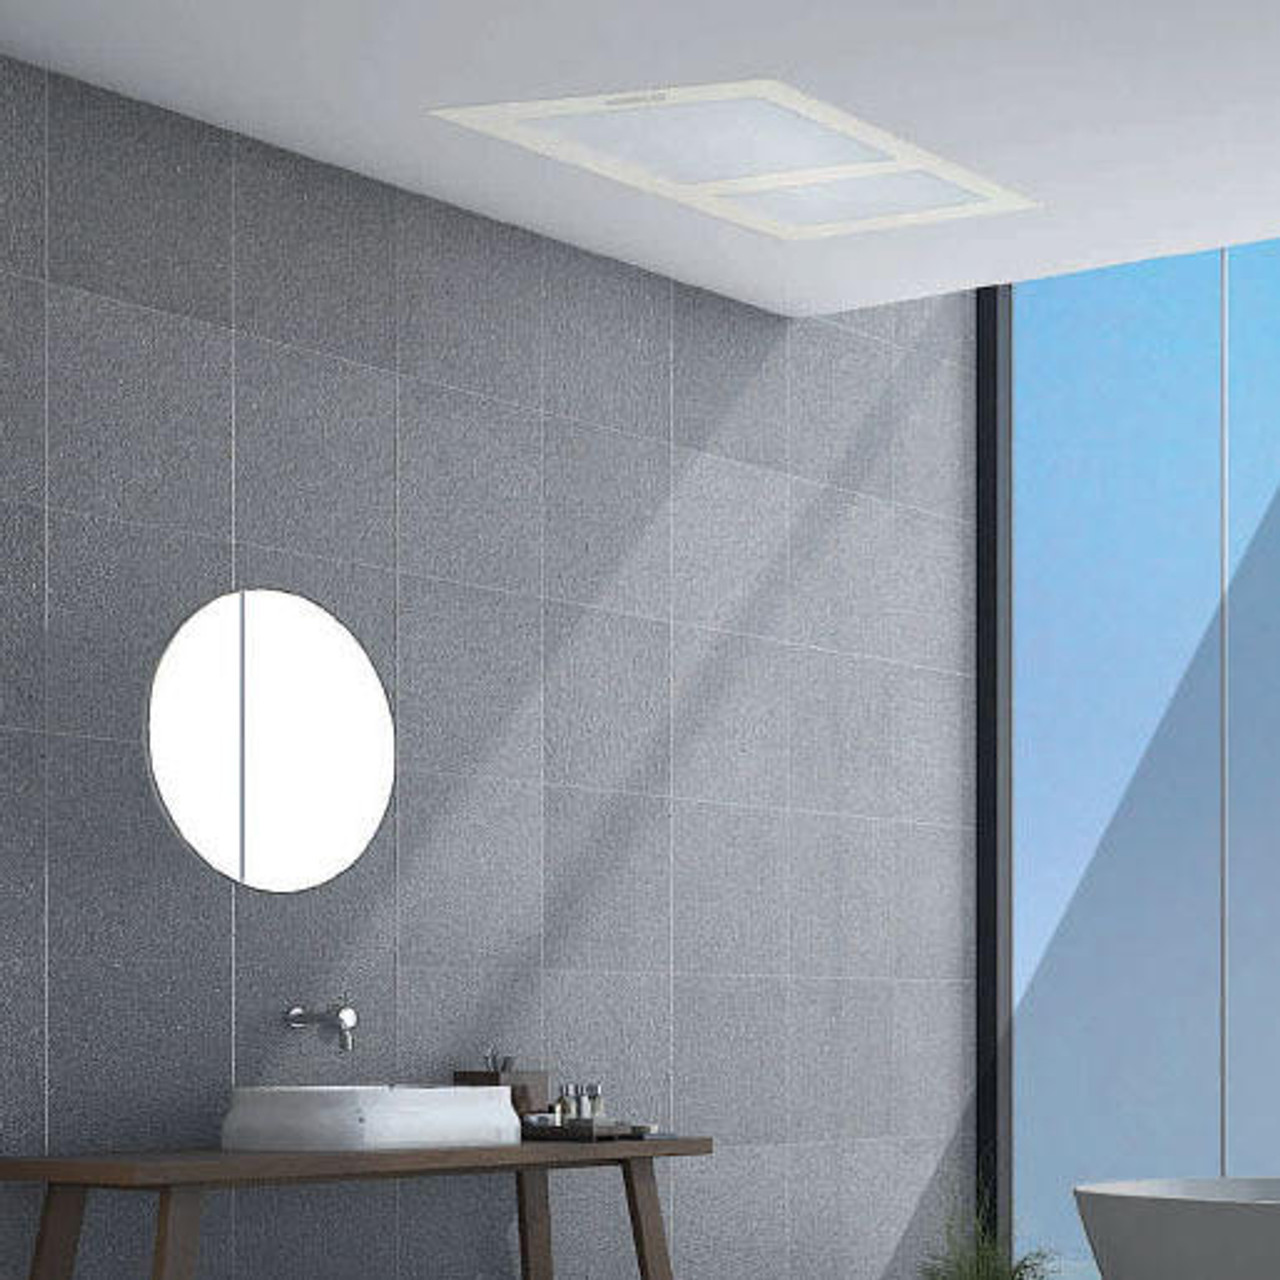 Martec Aspire 3 in 1 Bathroom Heater & Exhaust Fan with Tricolour 20W LED Light MBHA800W